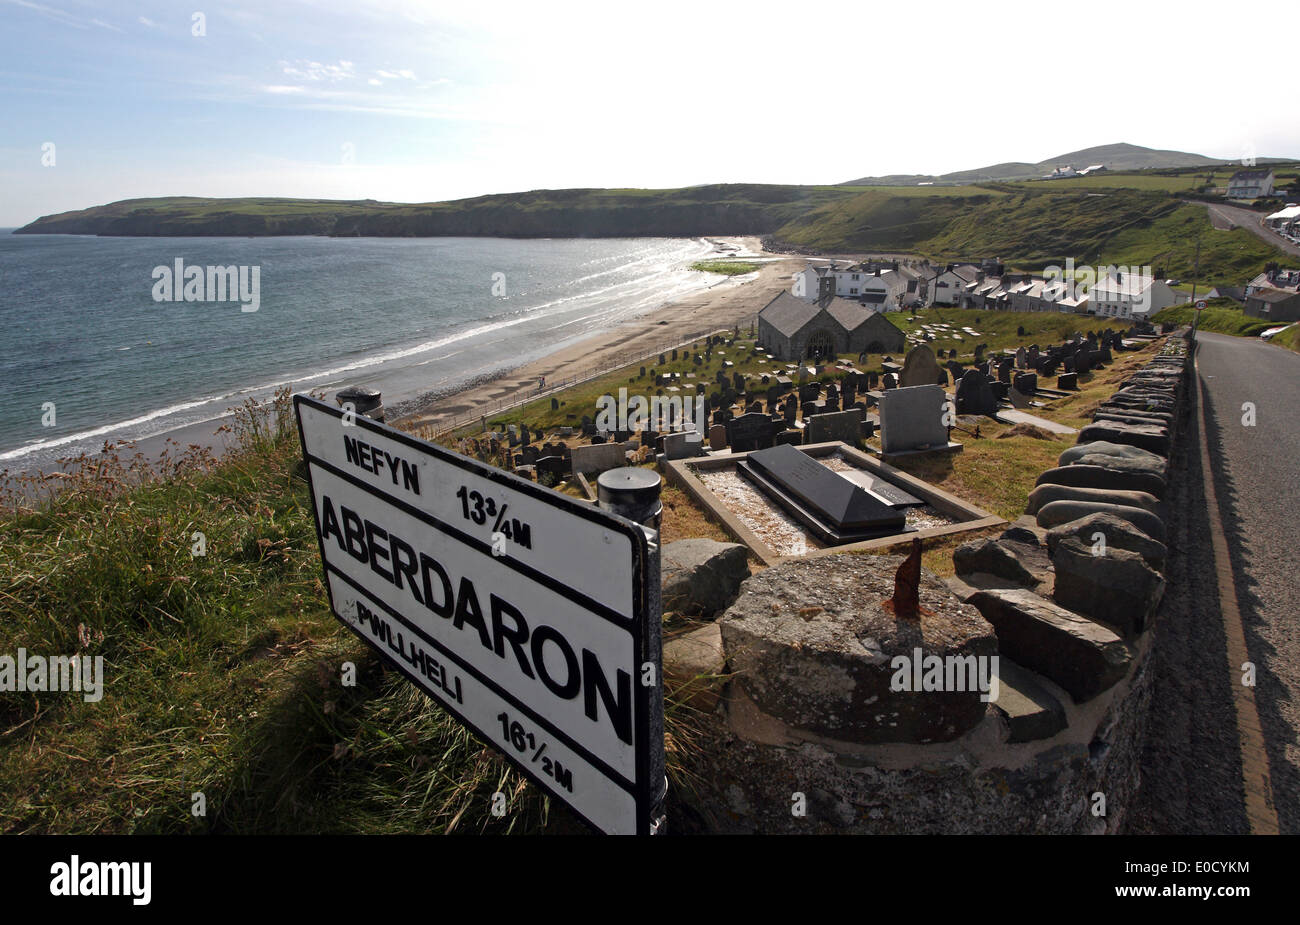 The cemetery from the village Aberdaron, Llyn peninsula, North Wales, Great Britain, Europe Stock Photo